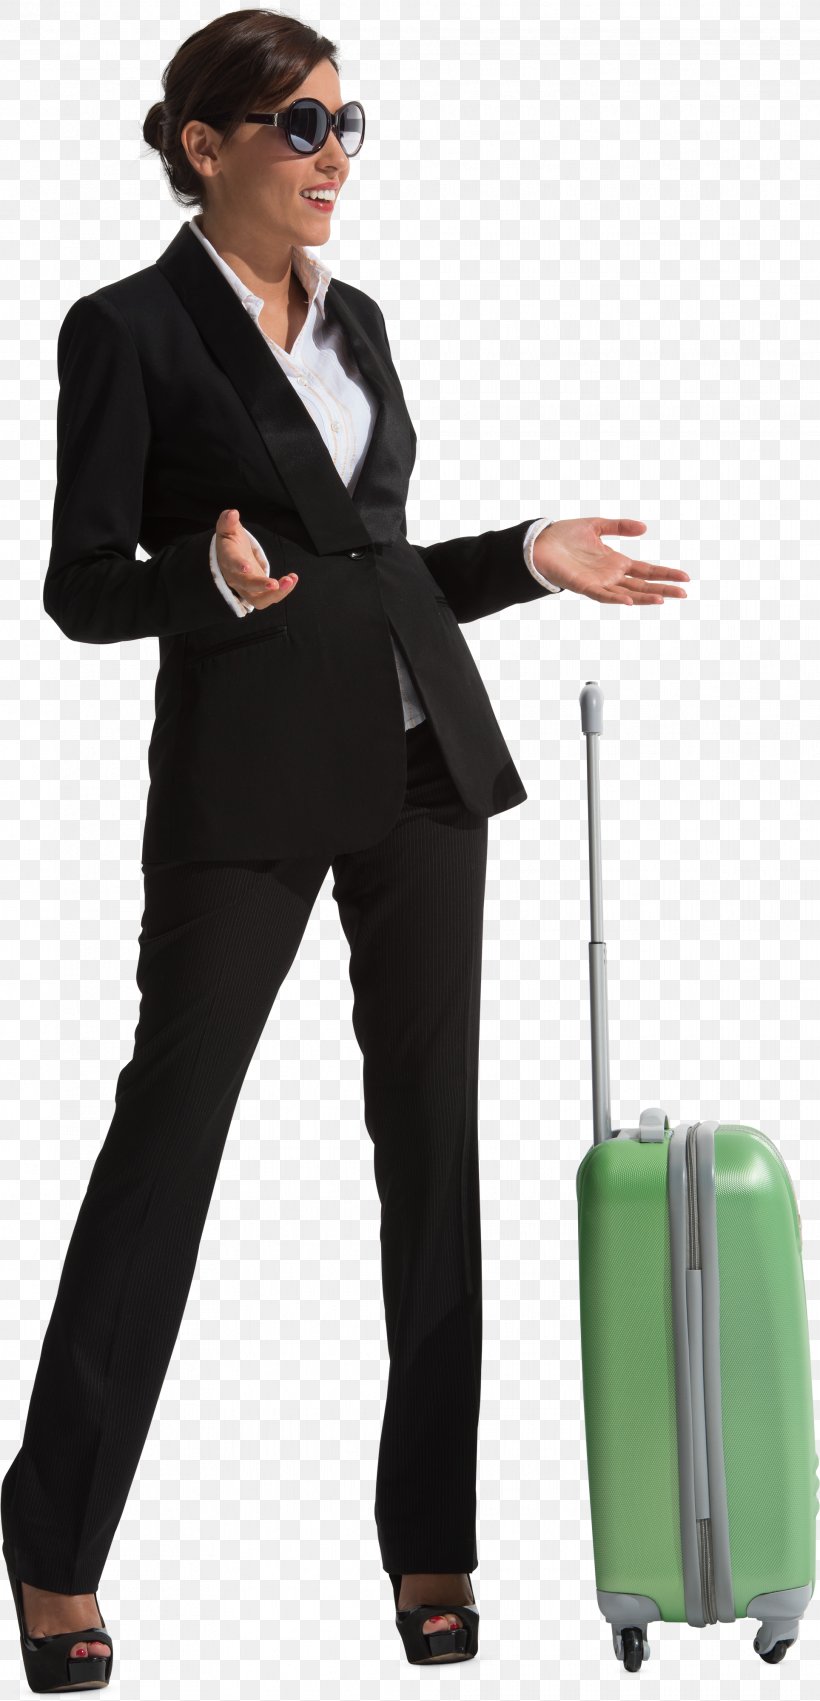 Suitcase Baggage Download, PNG, 1928x4000px, Suitcase, Animal, Baggage, Business, Businessperson Download Free